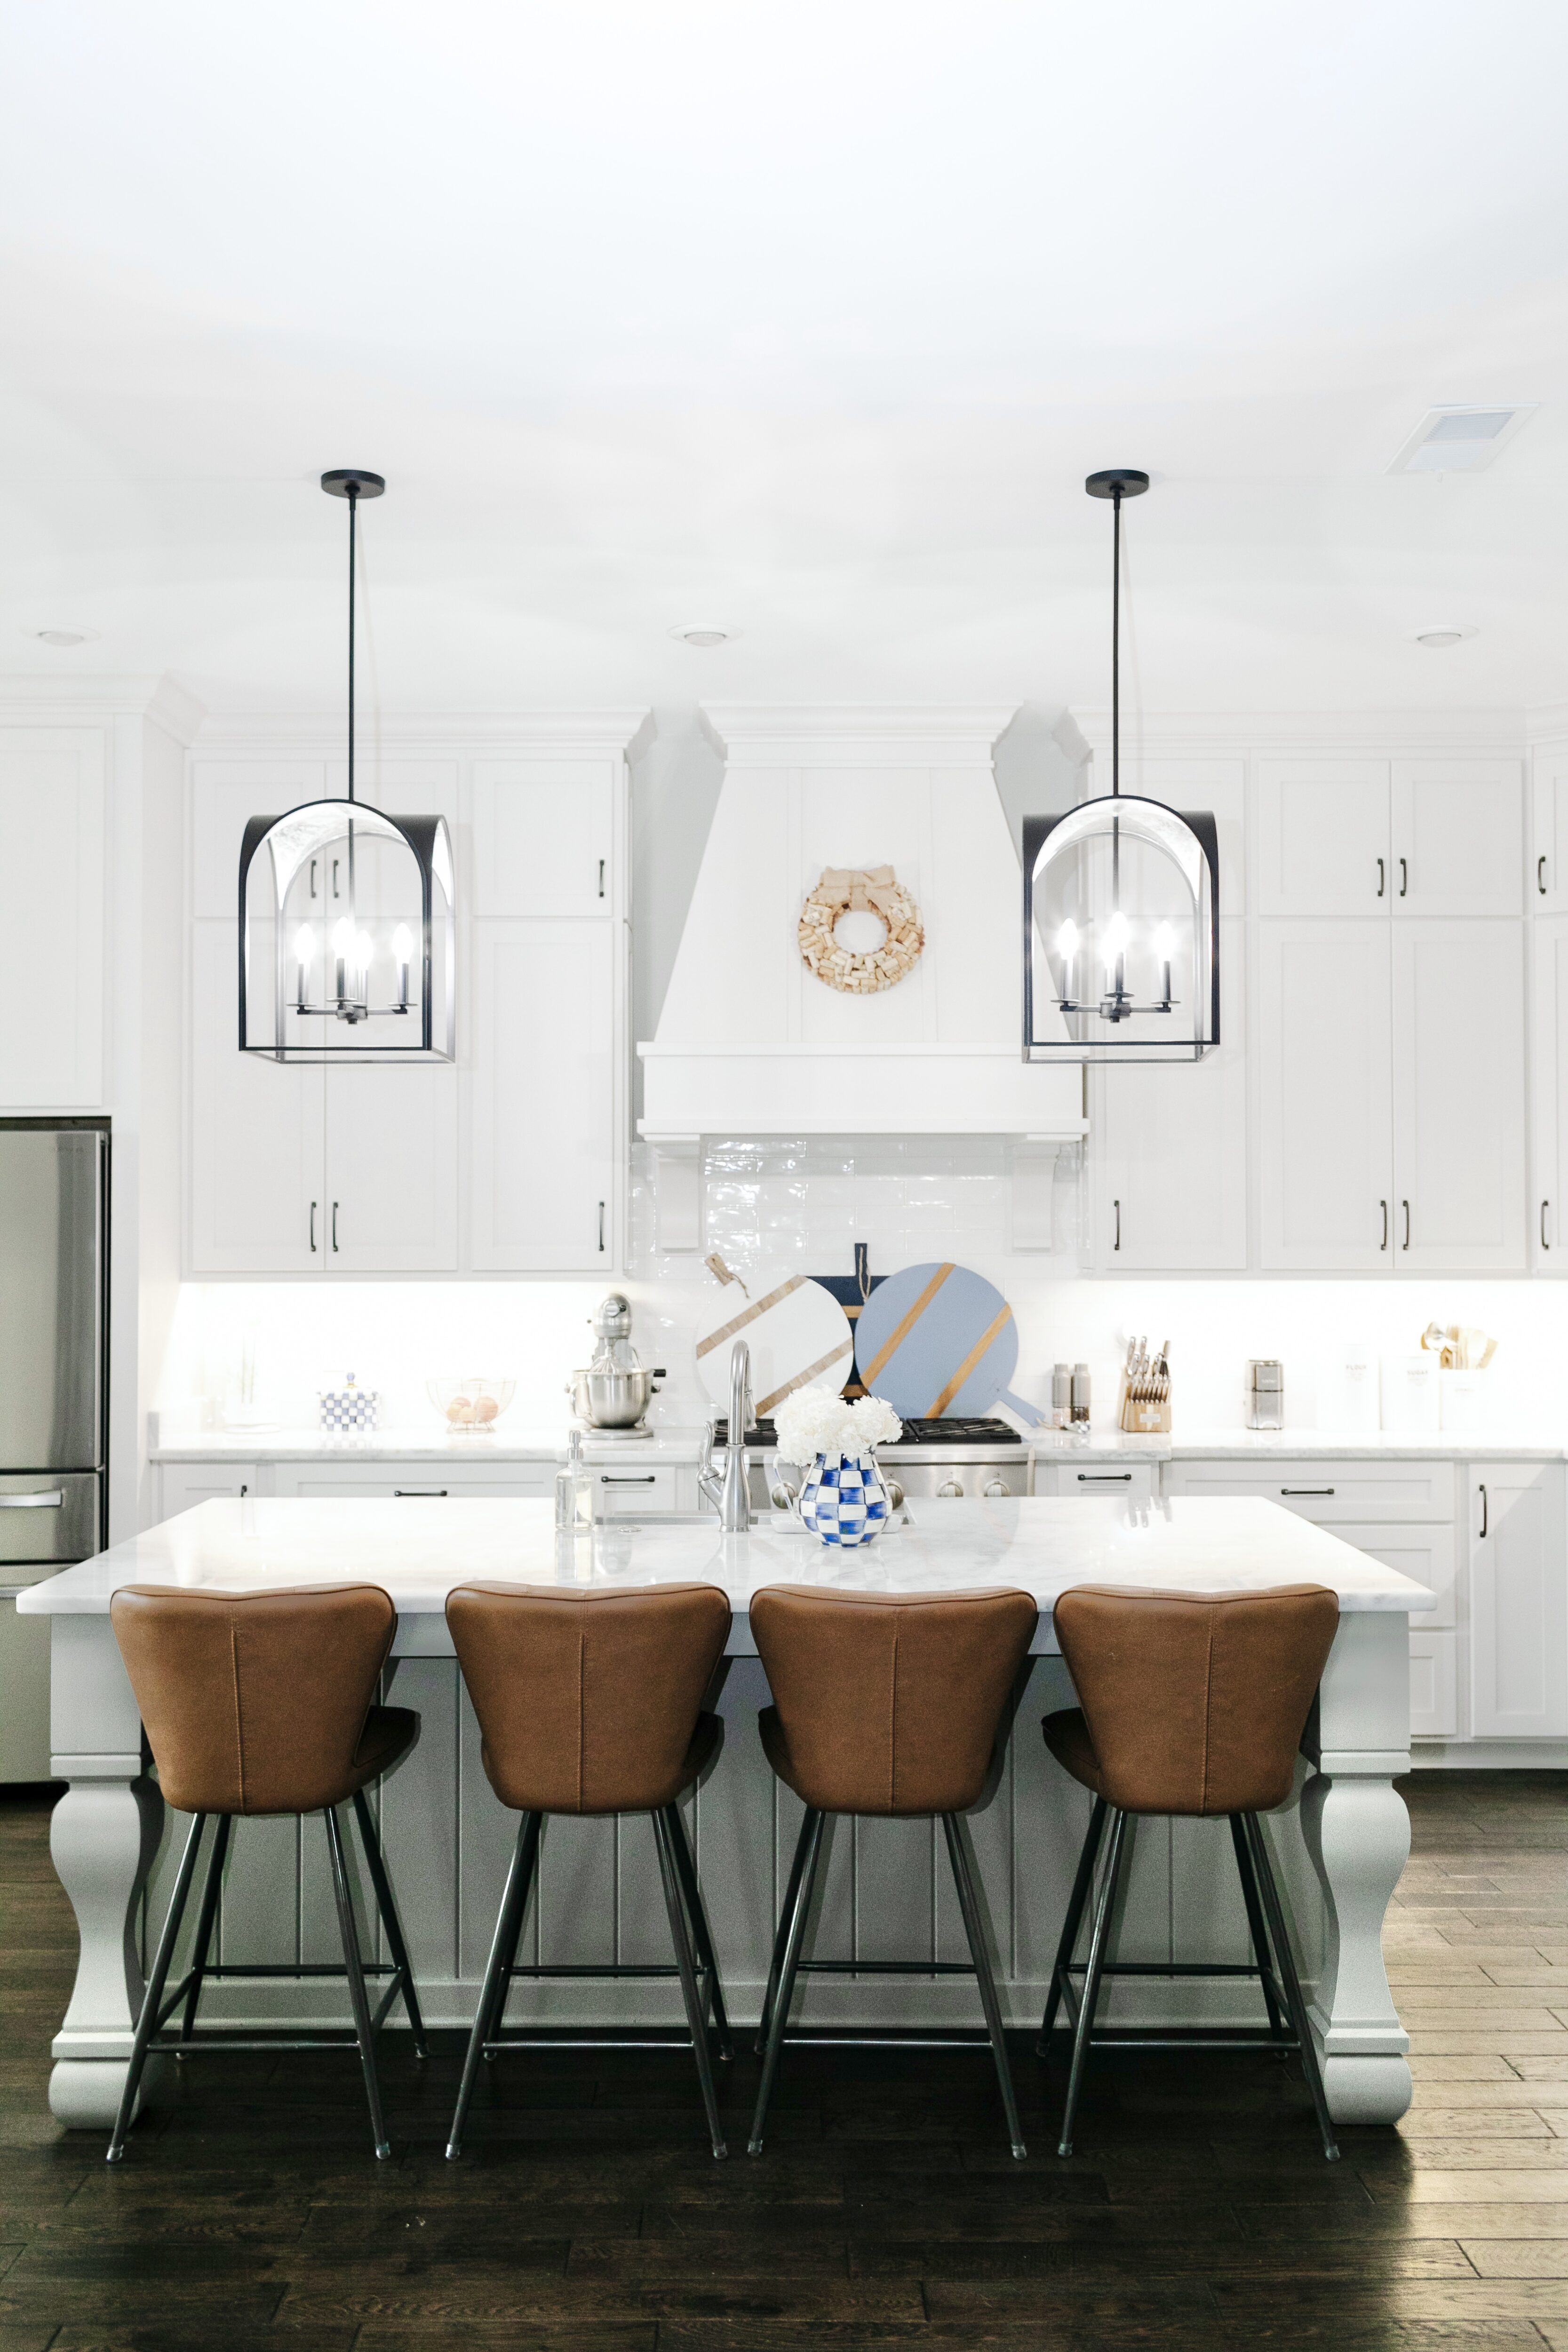 How to Update Lighting in Your Home, tips featured by top US lifestyle blogger, Walking in Memphis in High Heels.